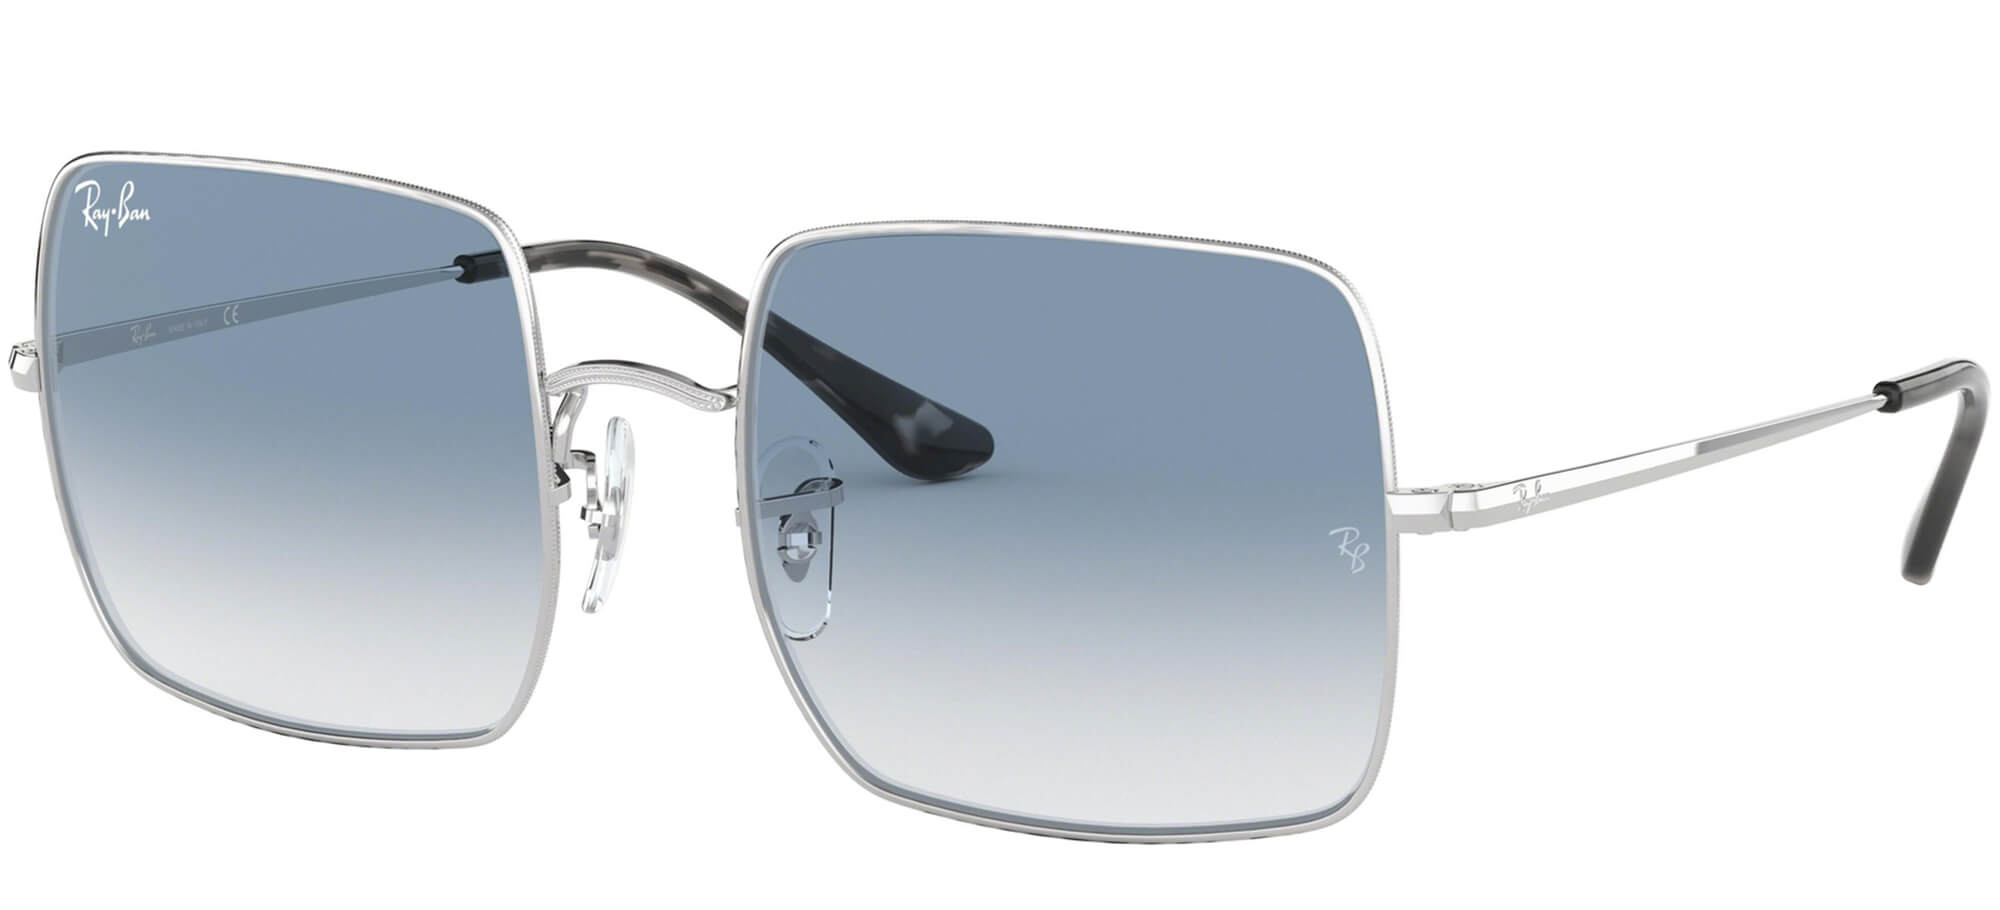 Ray-BanSQUARE RB 1971Silver/blue Shaded (9149/3F)